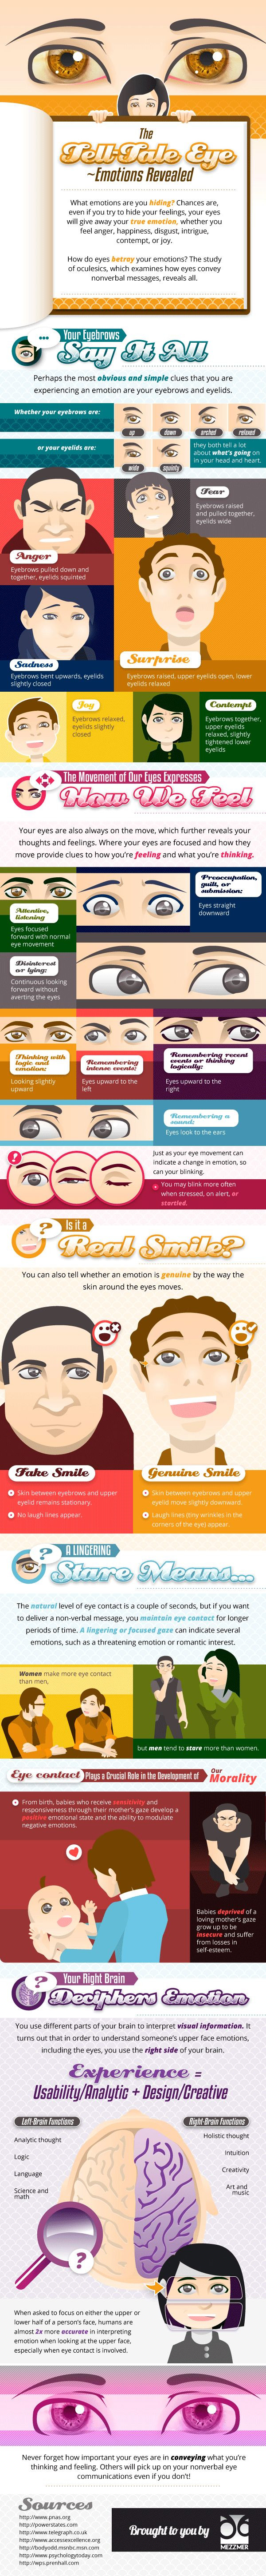 Emotions Revealed (Infographic)